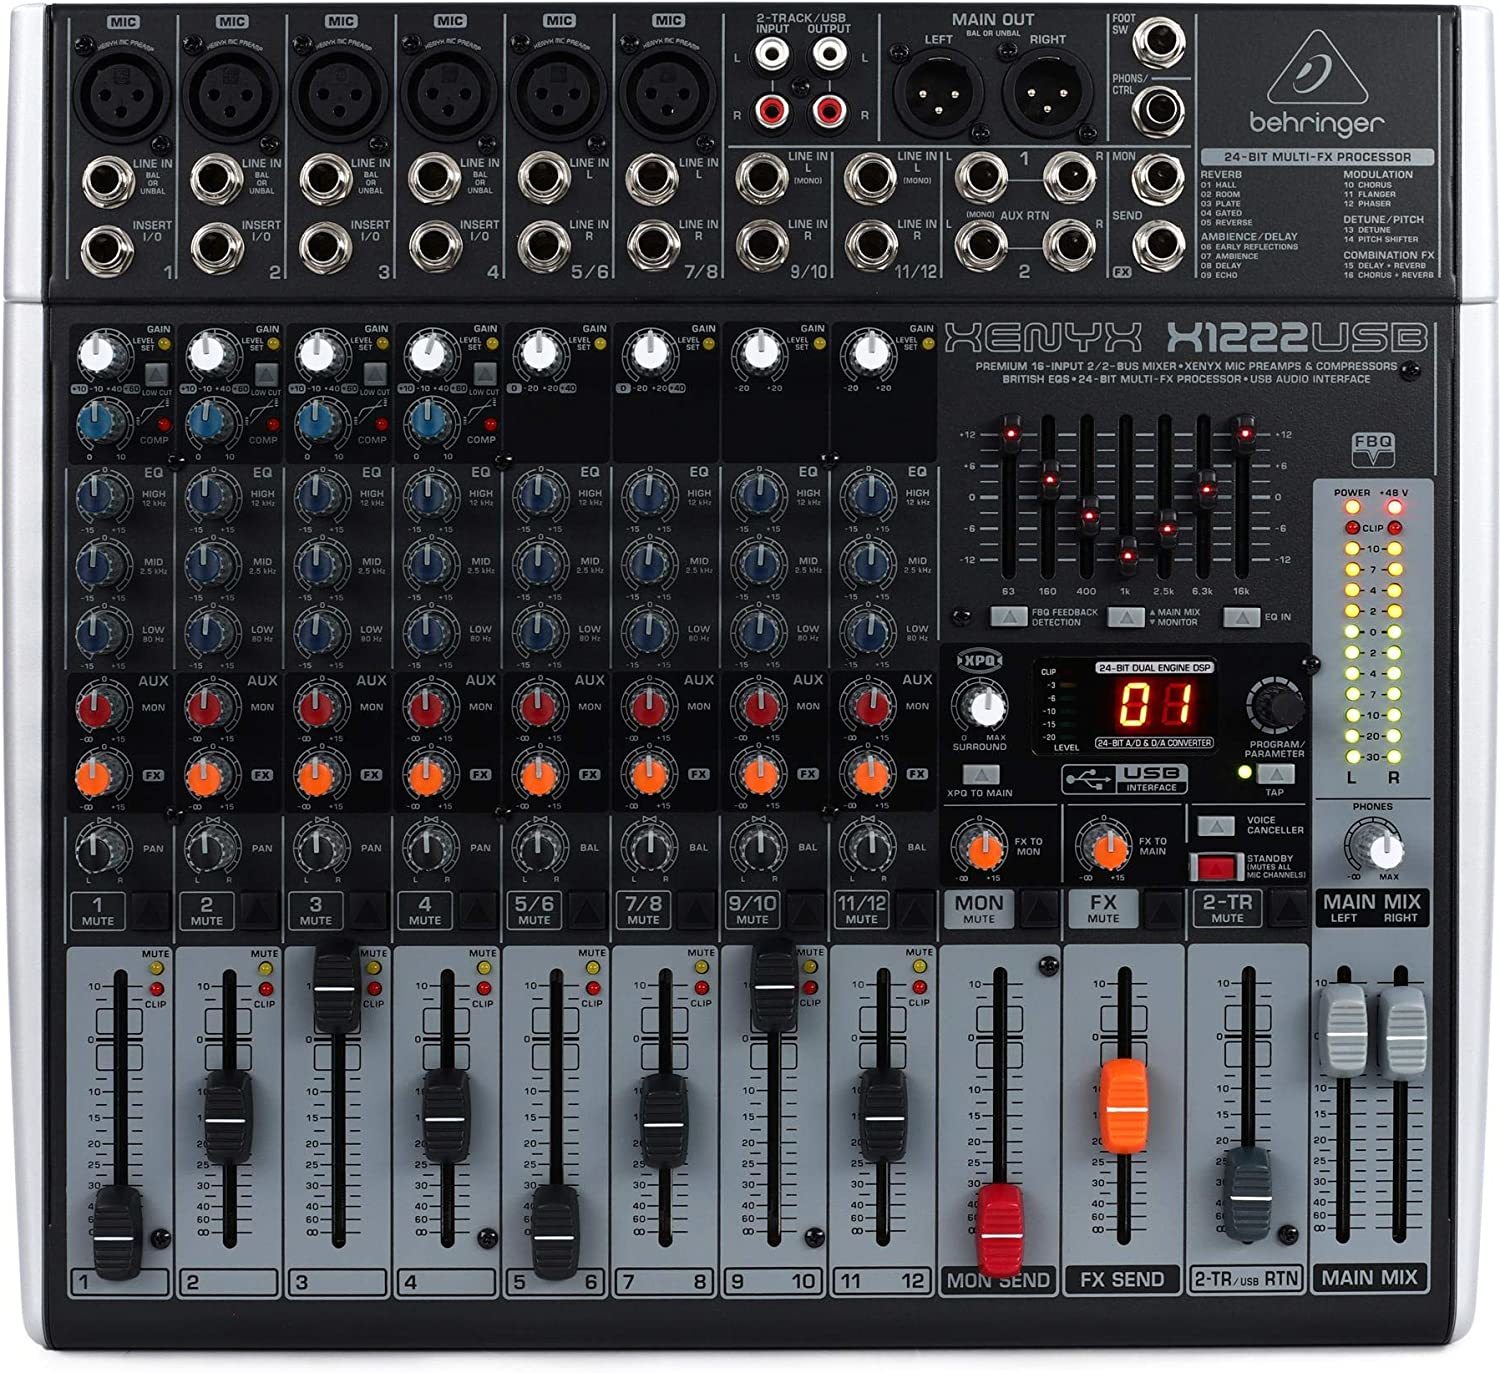 Primary image for Behringer Xenyx X1222USB Mixer with USB and Effects